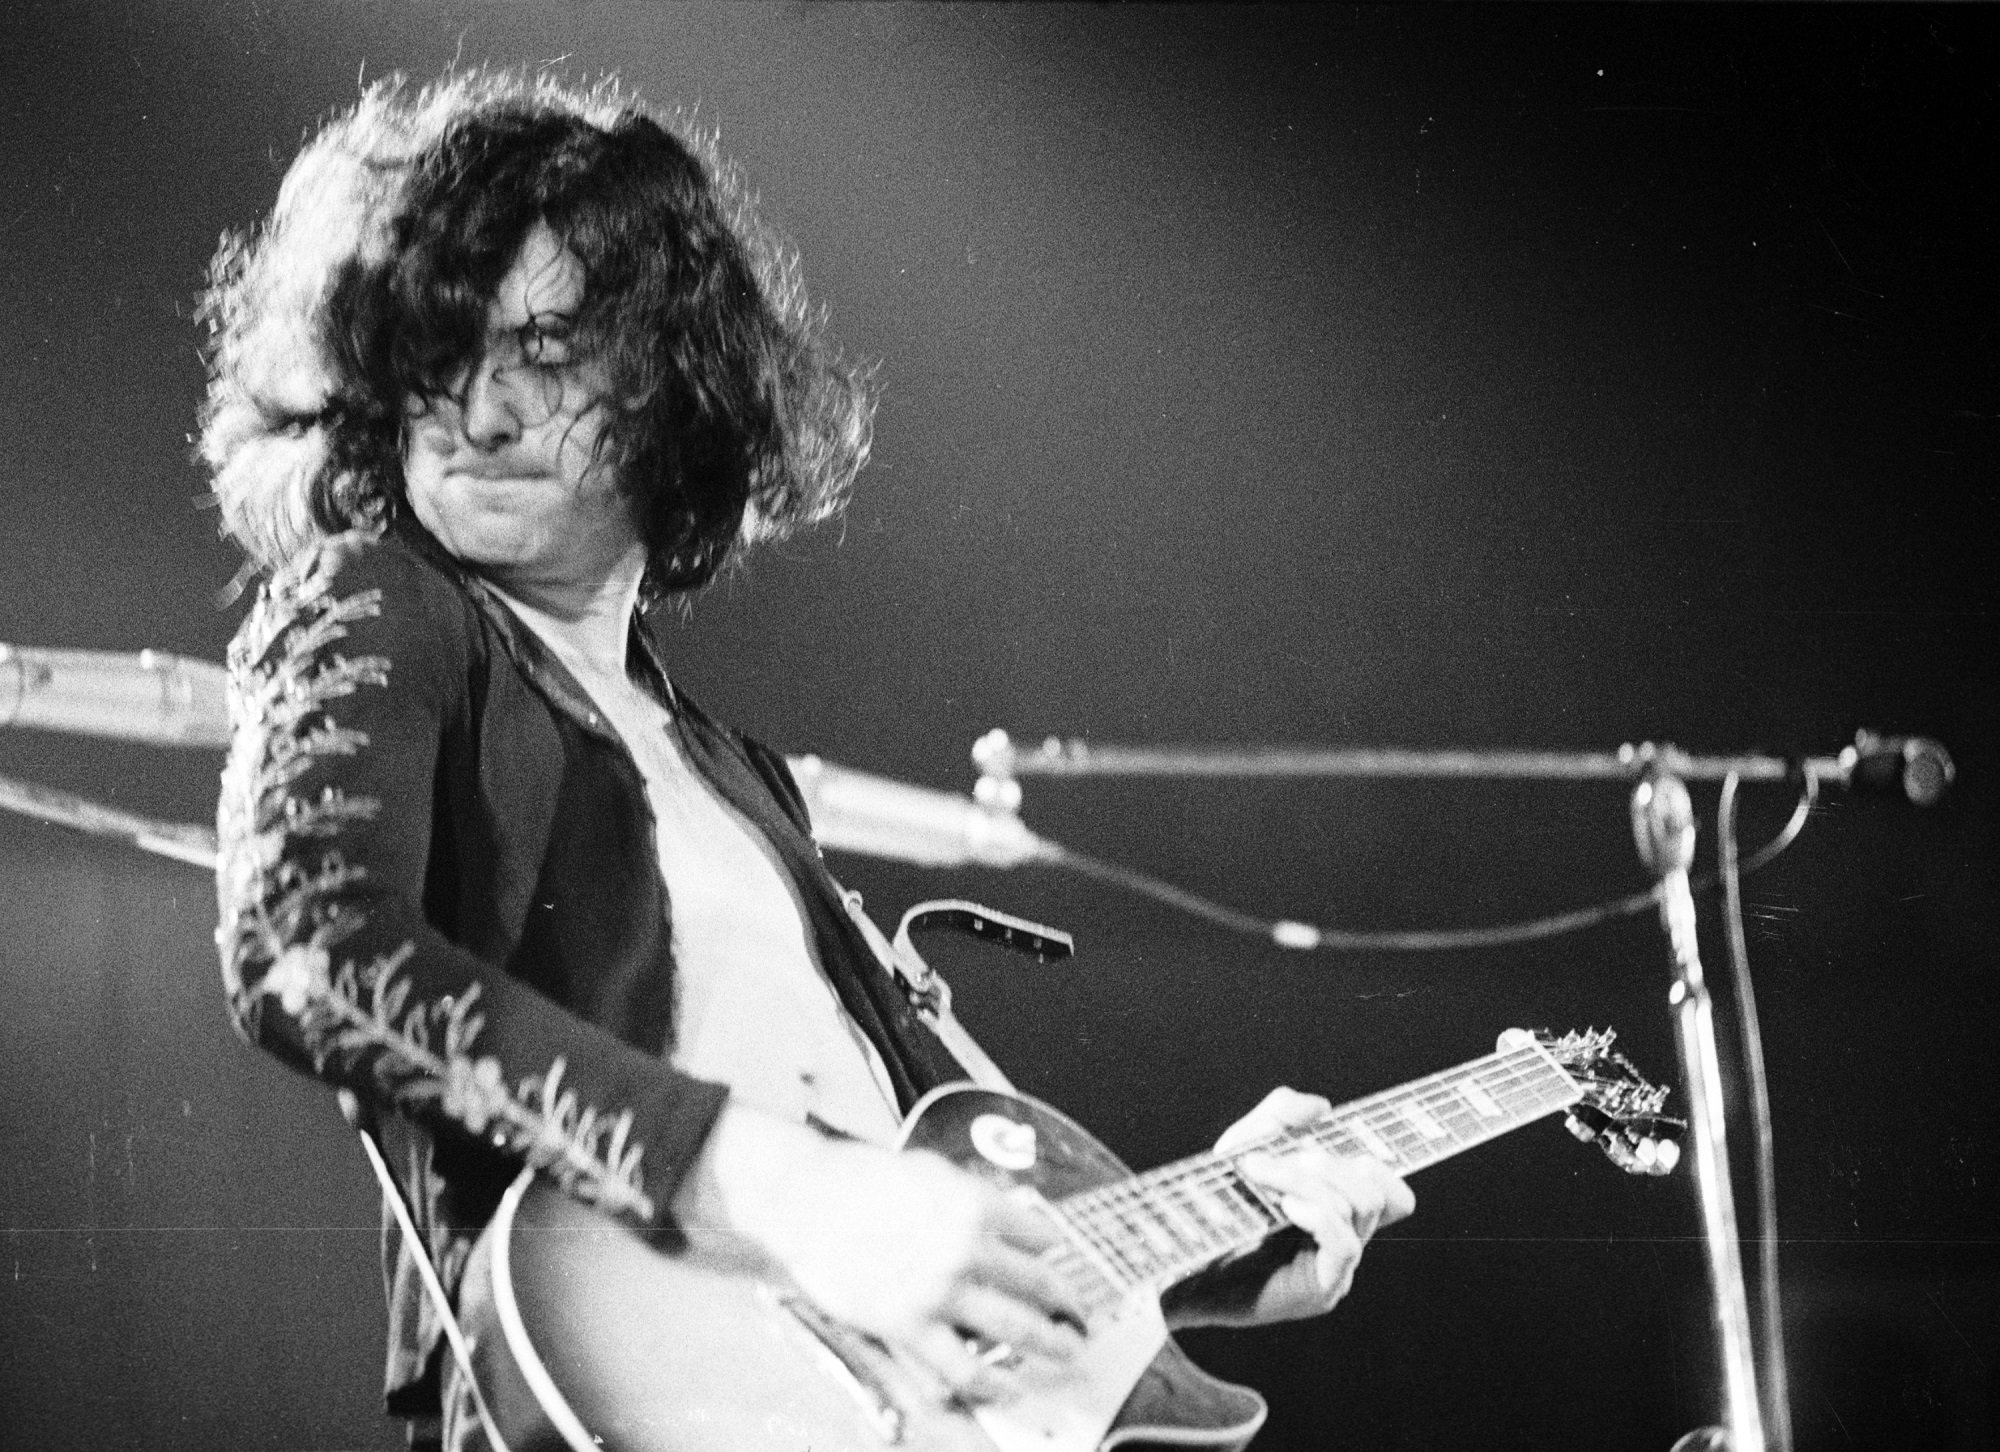 Jimmy Page Joined the Yardbirds After Butchering a Gig Playing Bass